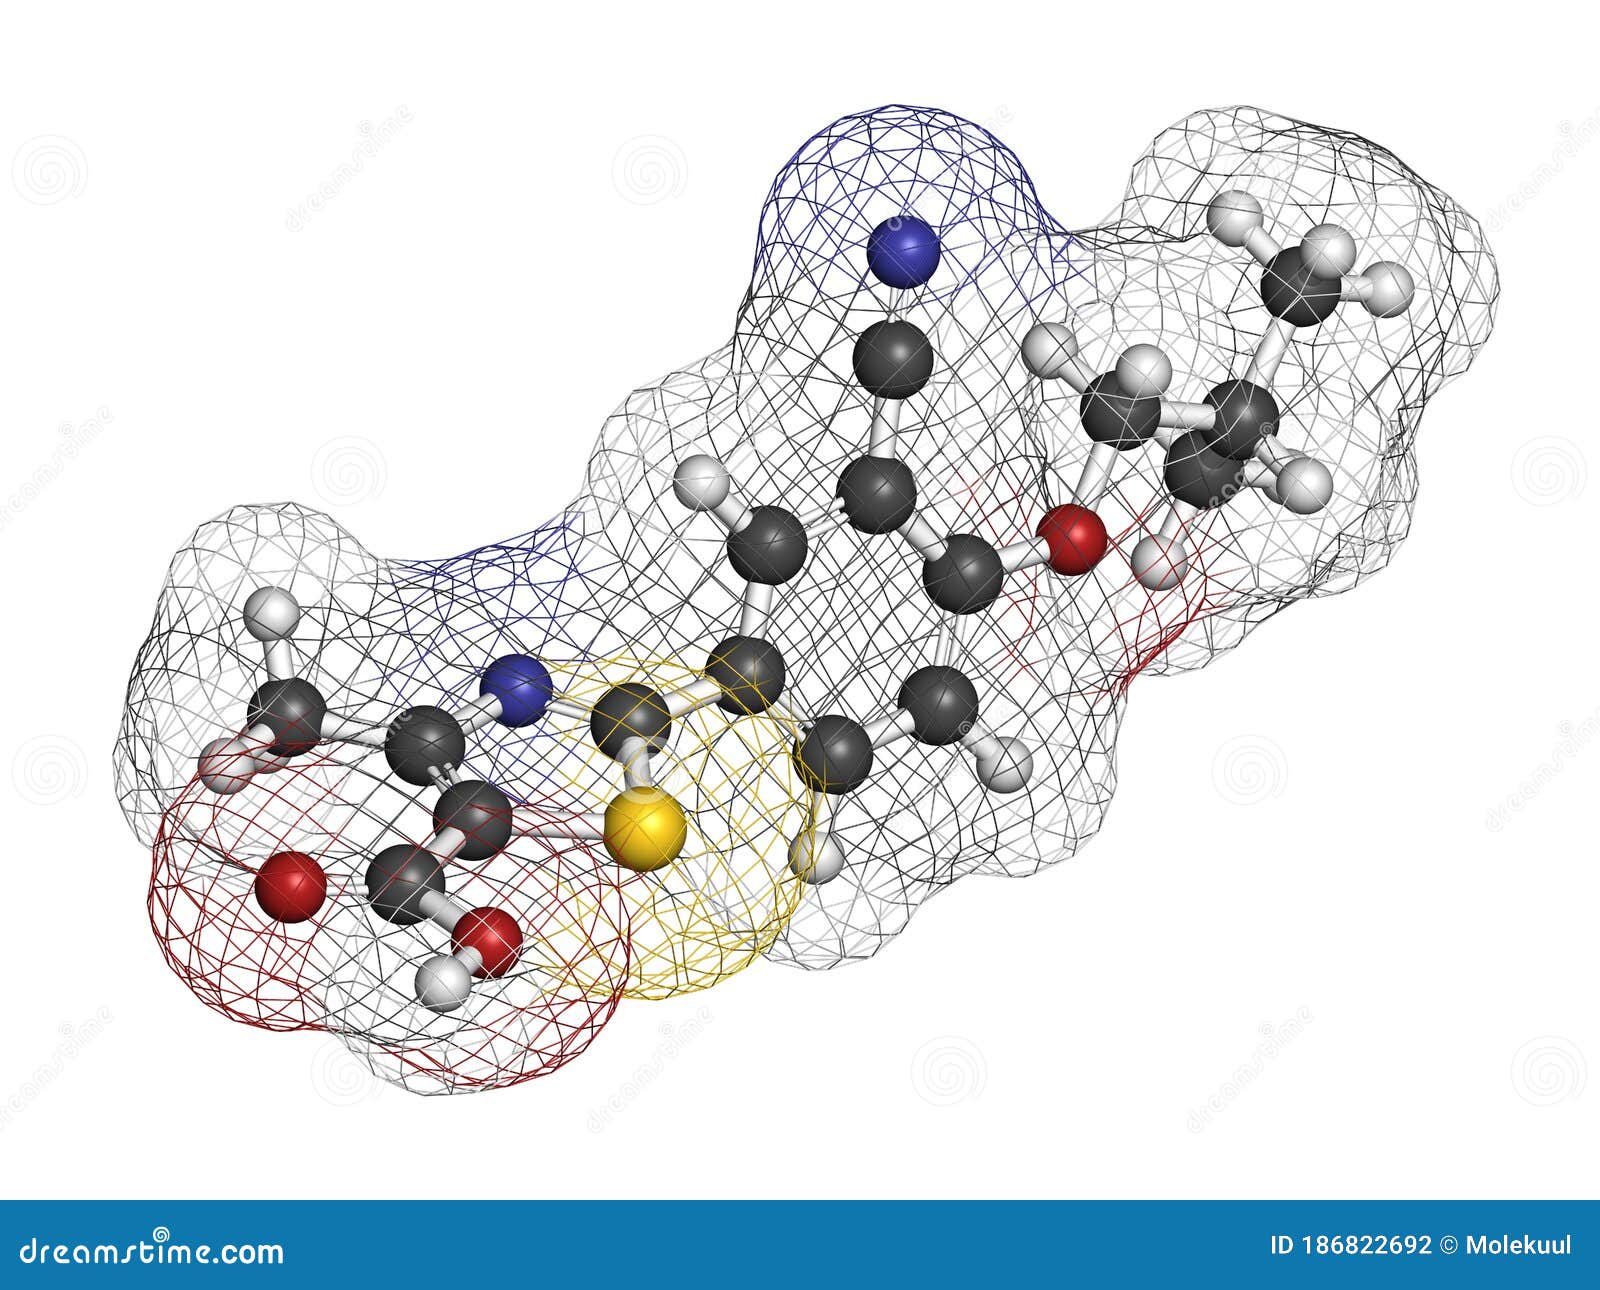 febuxostat gout drug molecule (xanthine oxidase inhibitor). 3d rendering. atoms are represented as spheres with conventional color